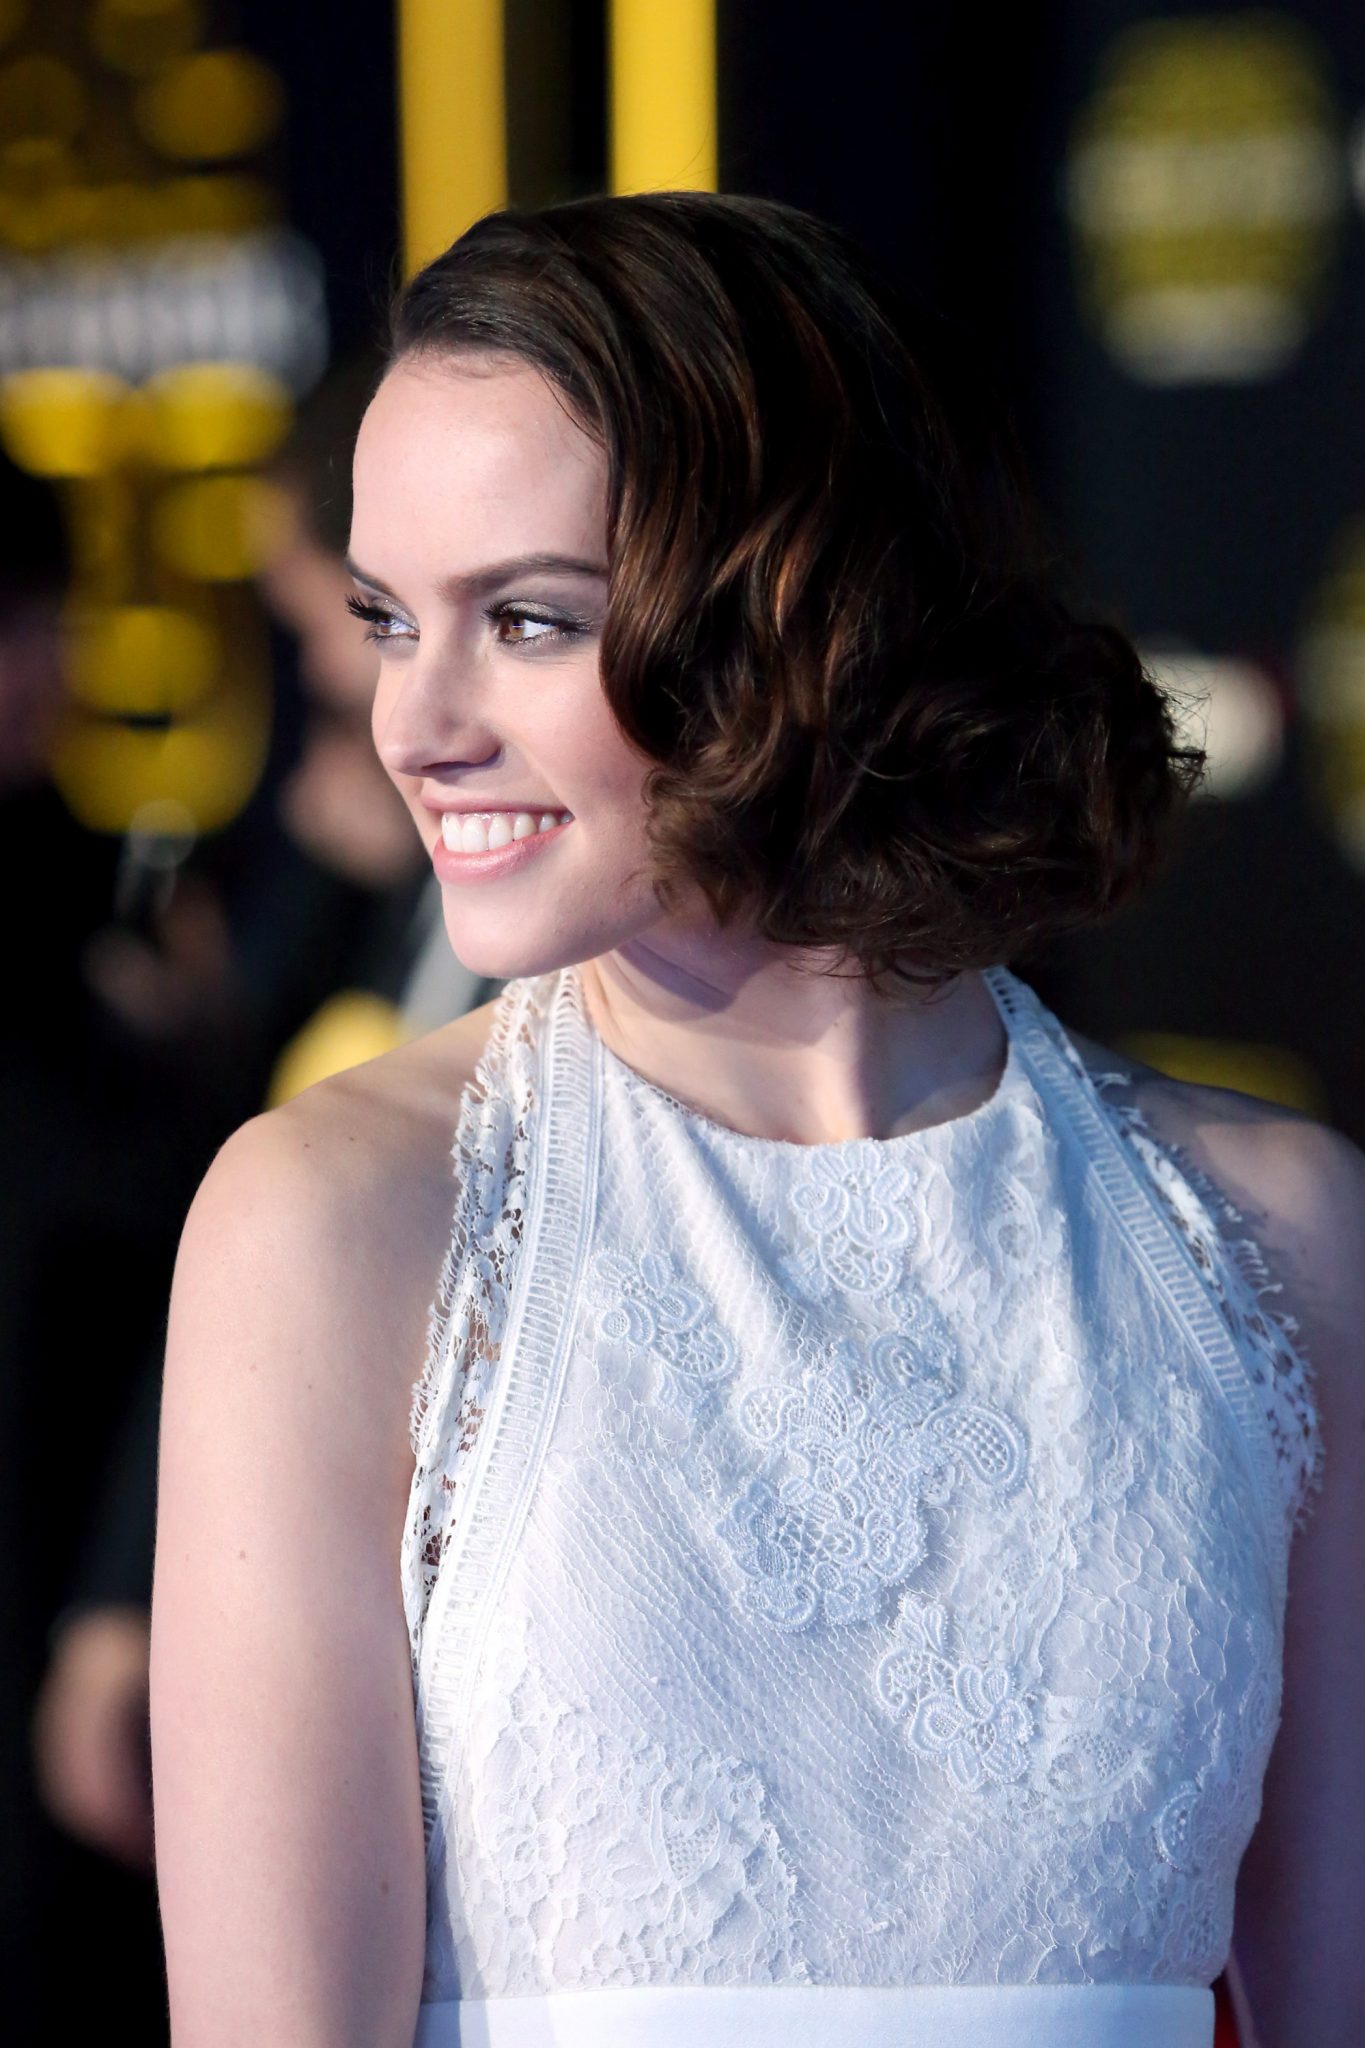 Wardrobe Breakdown: Daisy Ridley At The World Premiere of “Star Wars: The Force Awakens